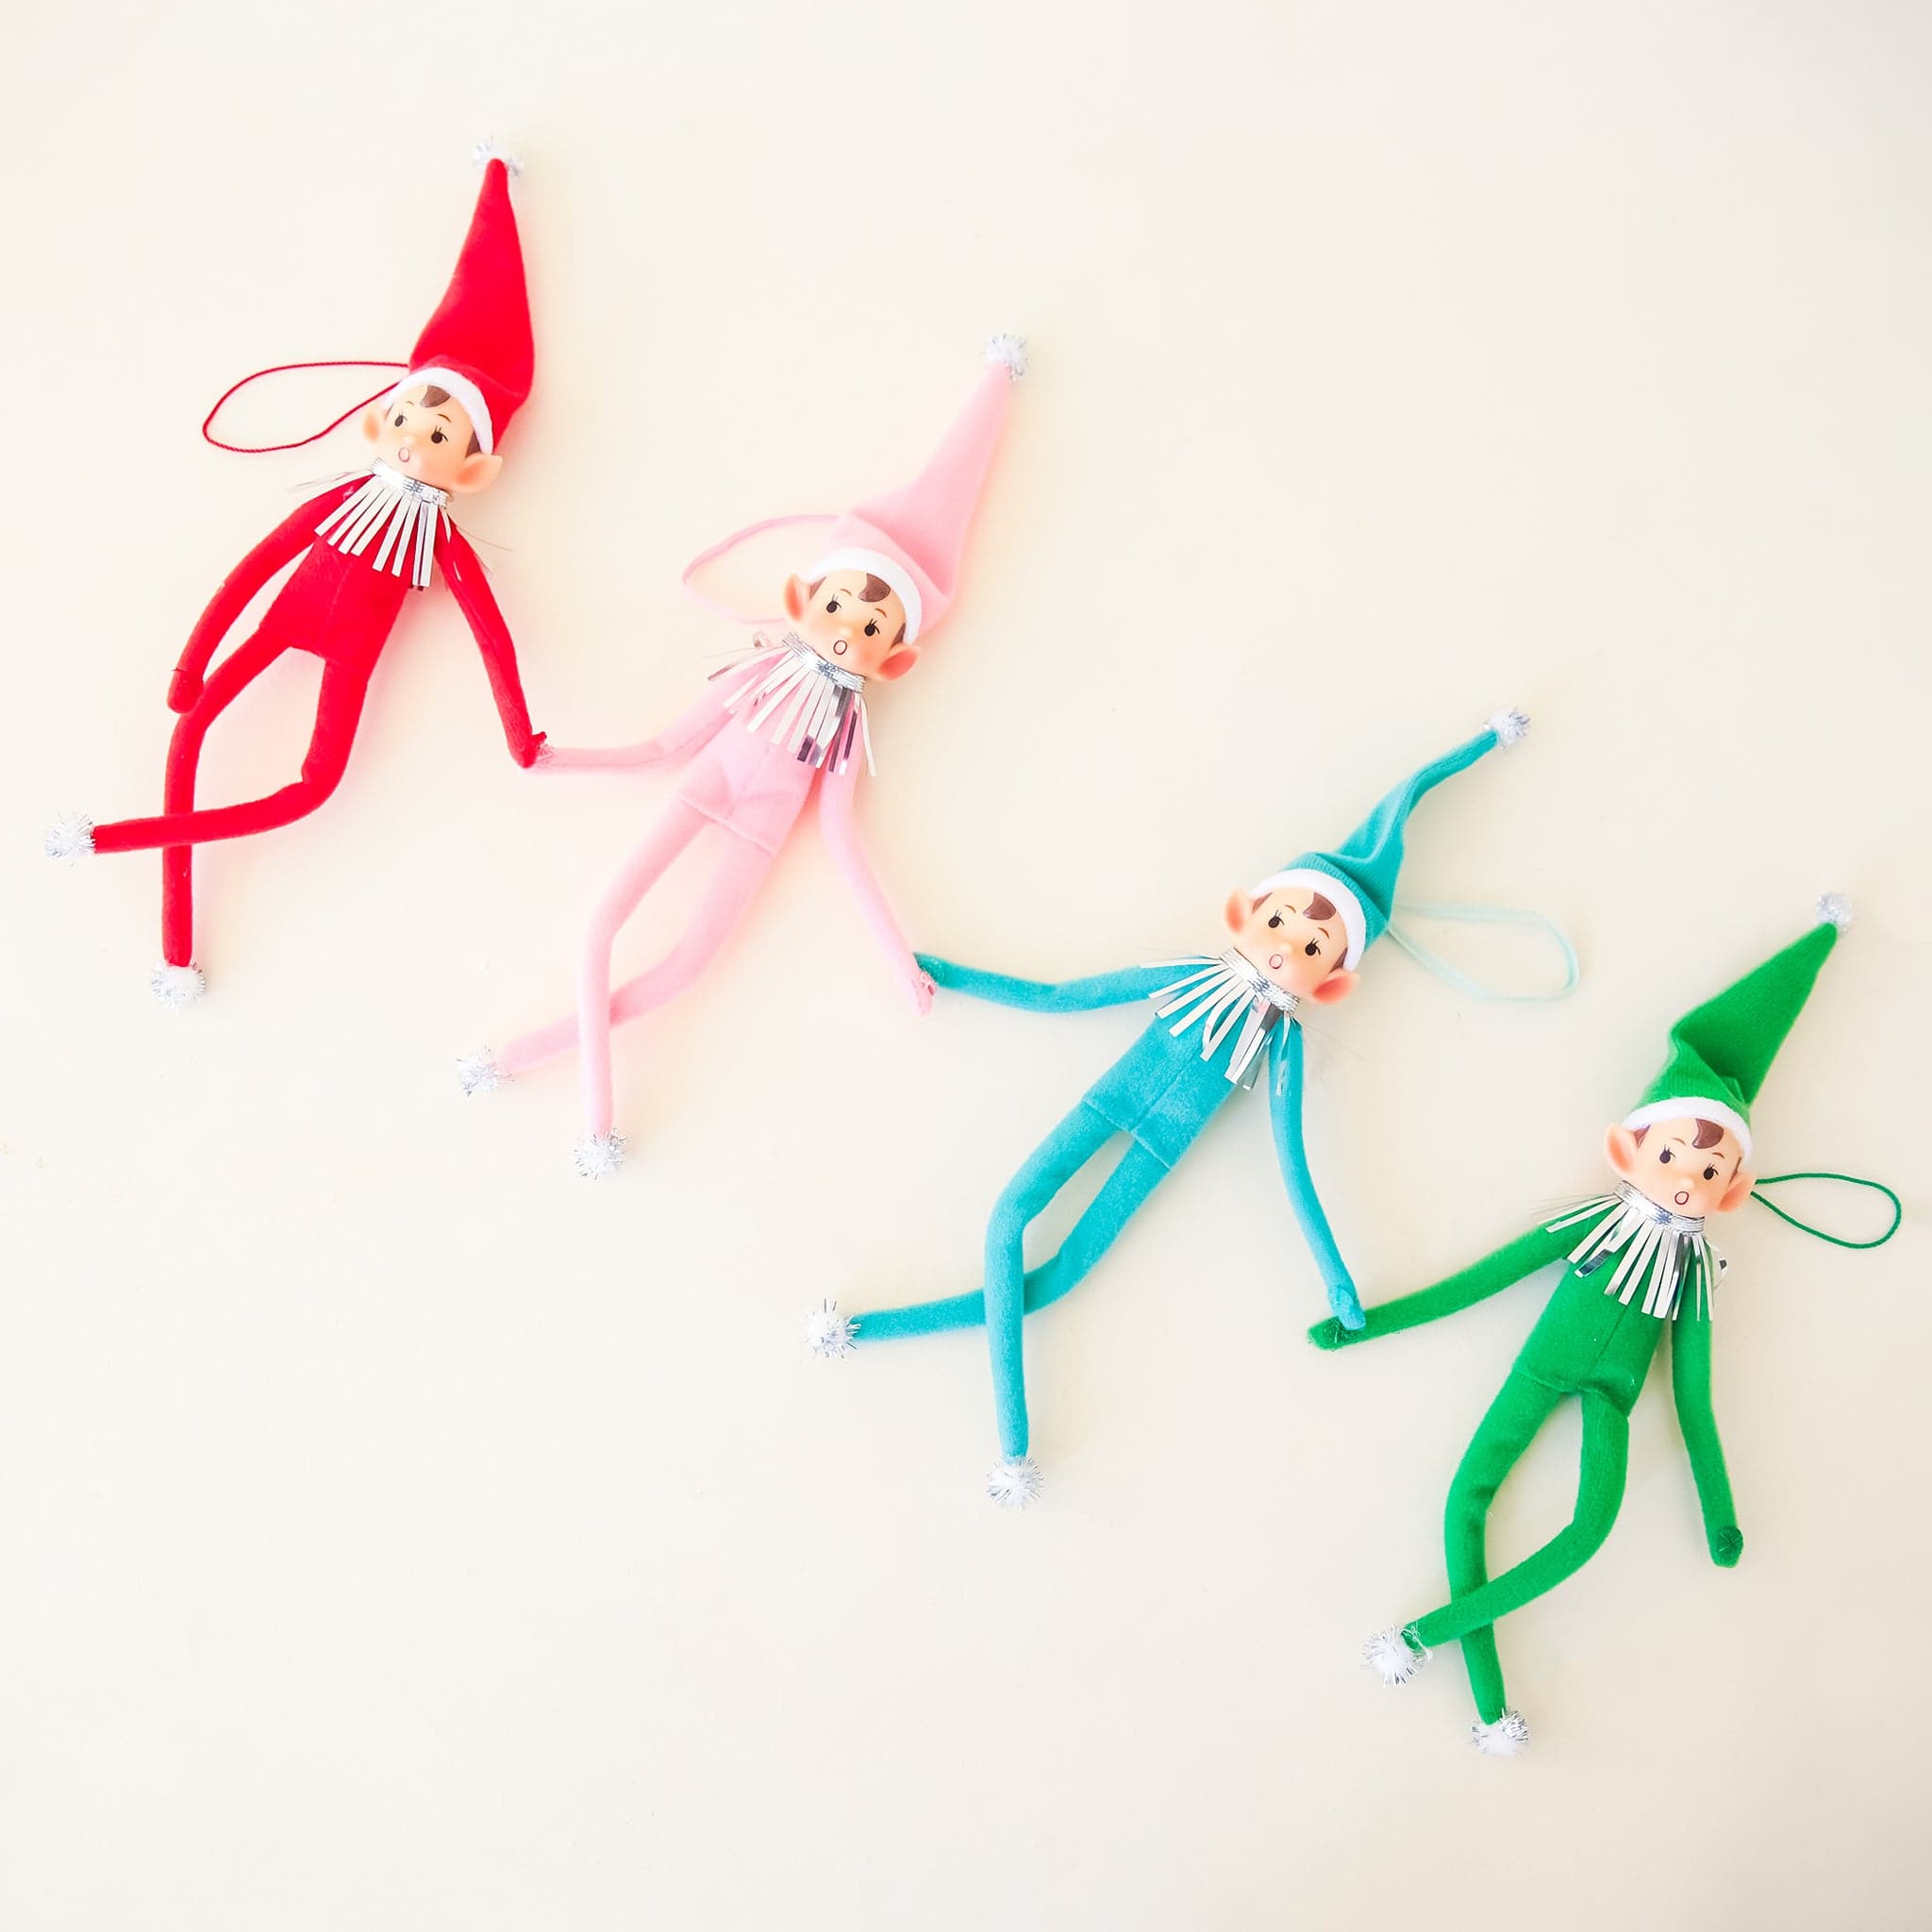 On a cream background is a pink elf ornament with bendy arms and legs and a pink loop for hanging and photographed next to the other three available colors, red, green and teal.